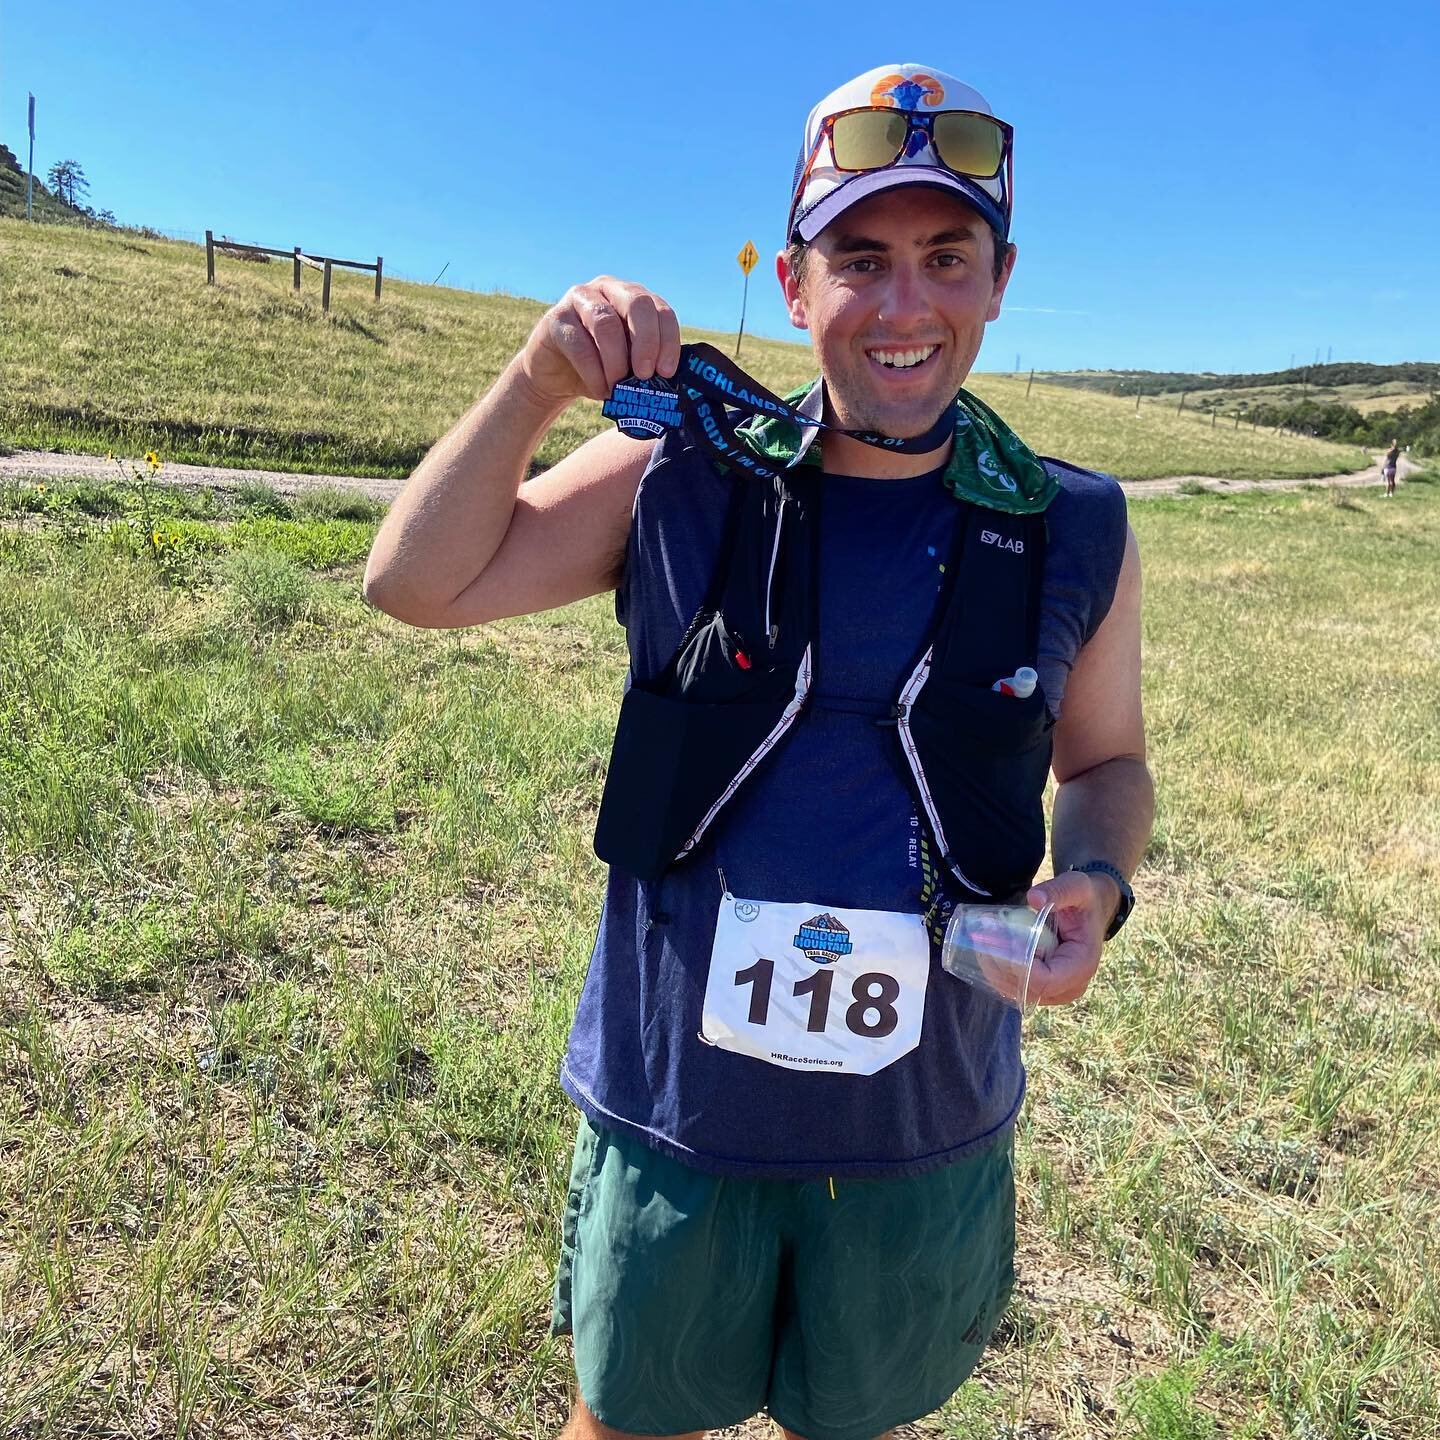 👏 Big cheers for @ritherockiesfan who ran the Wildcat 10-Mile Trail Race this past weekend! 

⛰ Riley spent the summer getting ready for the race by incorporating daily stair goals and practicing on the trails! 

⛽️ He nailed his fueling plan and ra